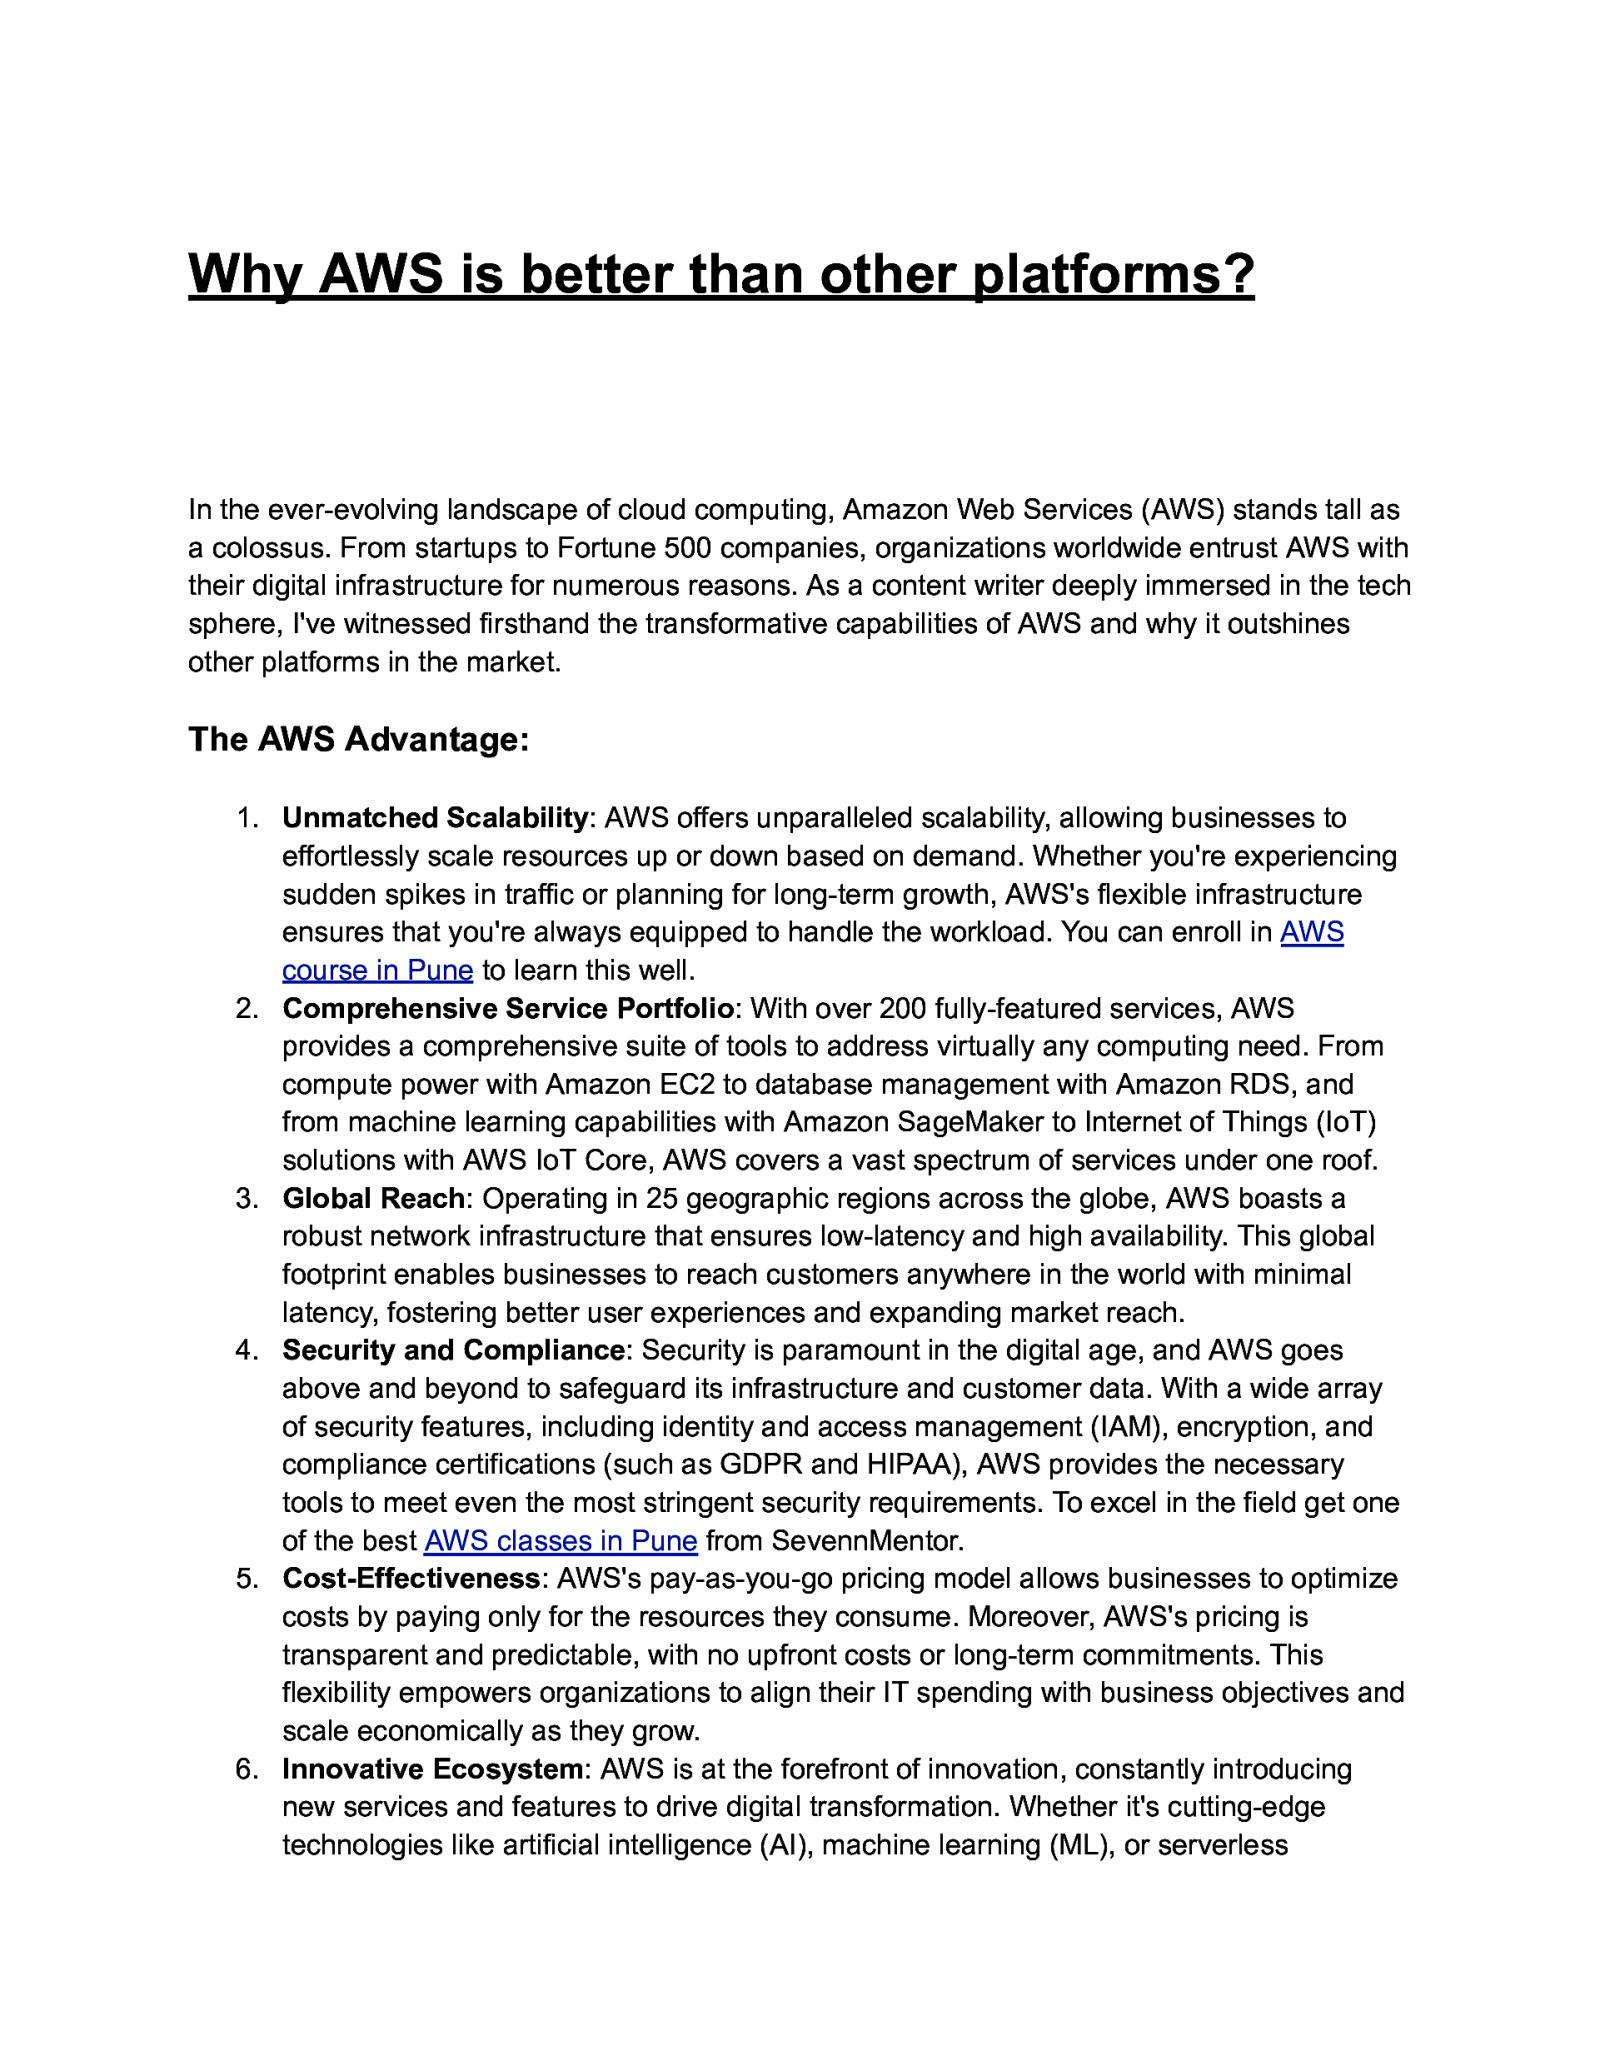 AWS course in Pune